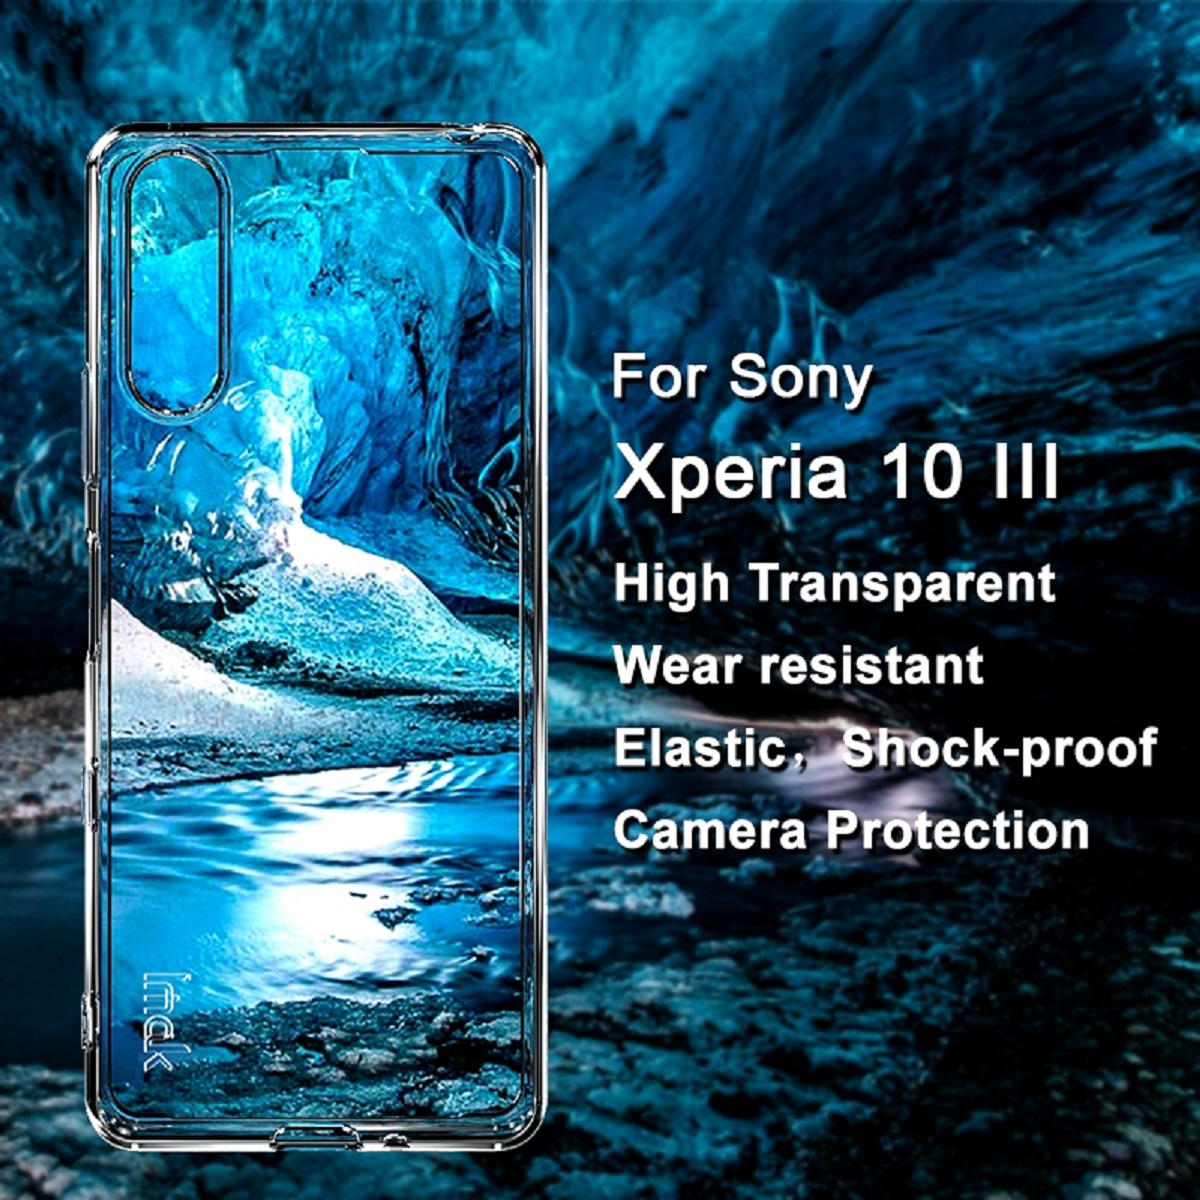 Transparent 10 PROTECTORKING Hülle, Sony, Backcover, Backcover, Xperia III,